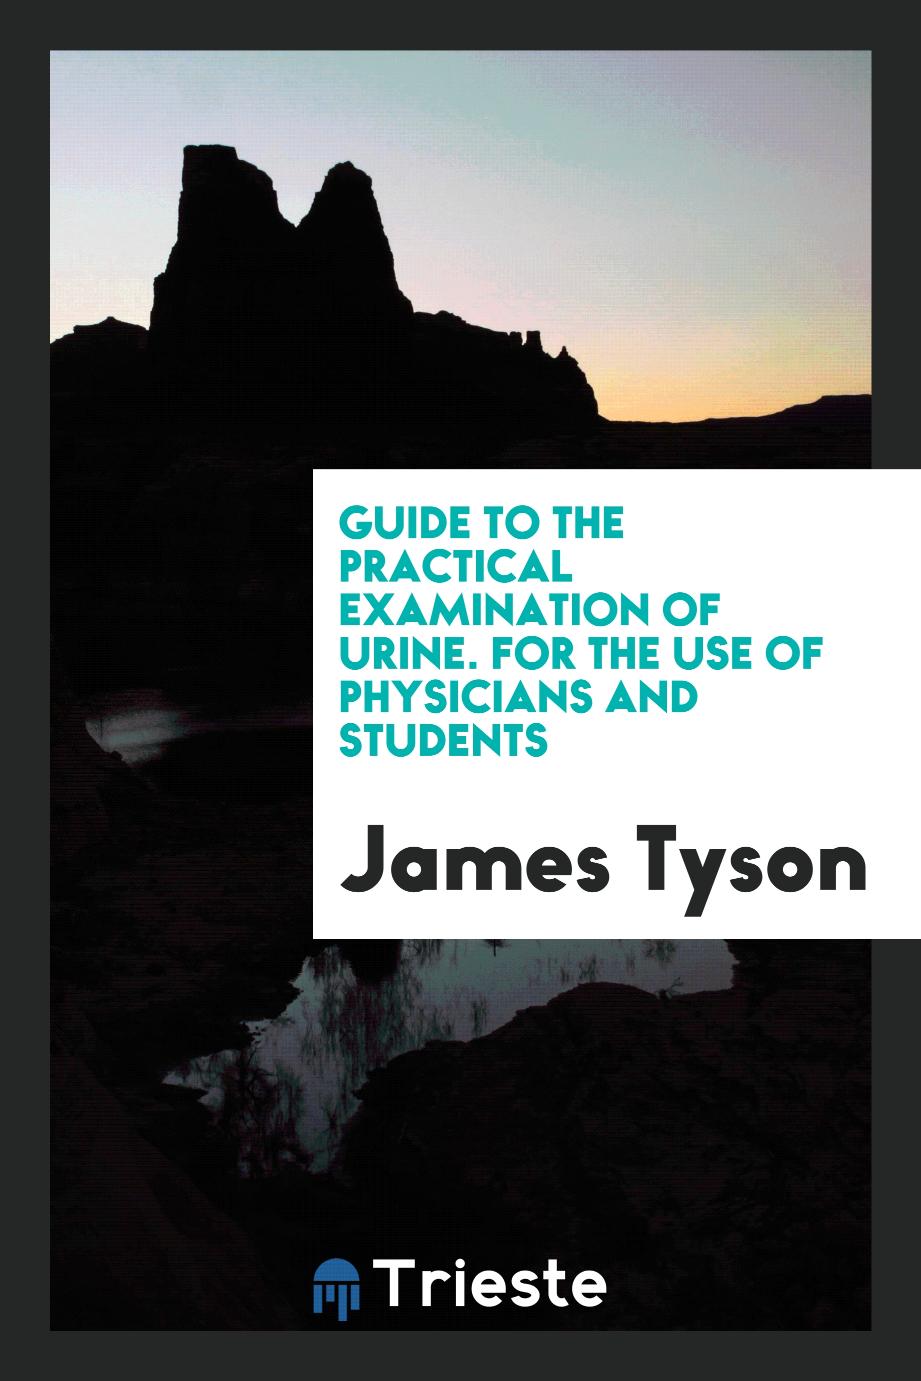 Guide to the Practical Examination of Urine. For the Use of Physicians and Students